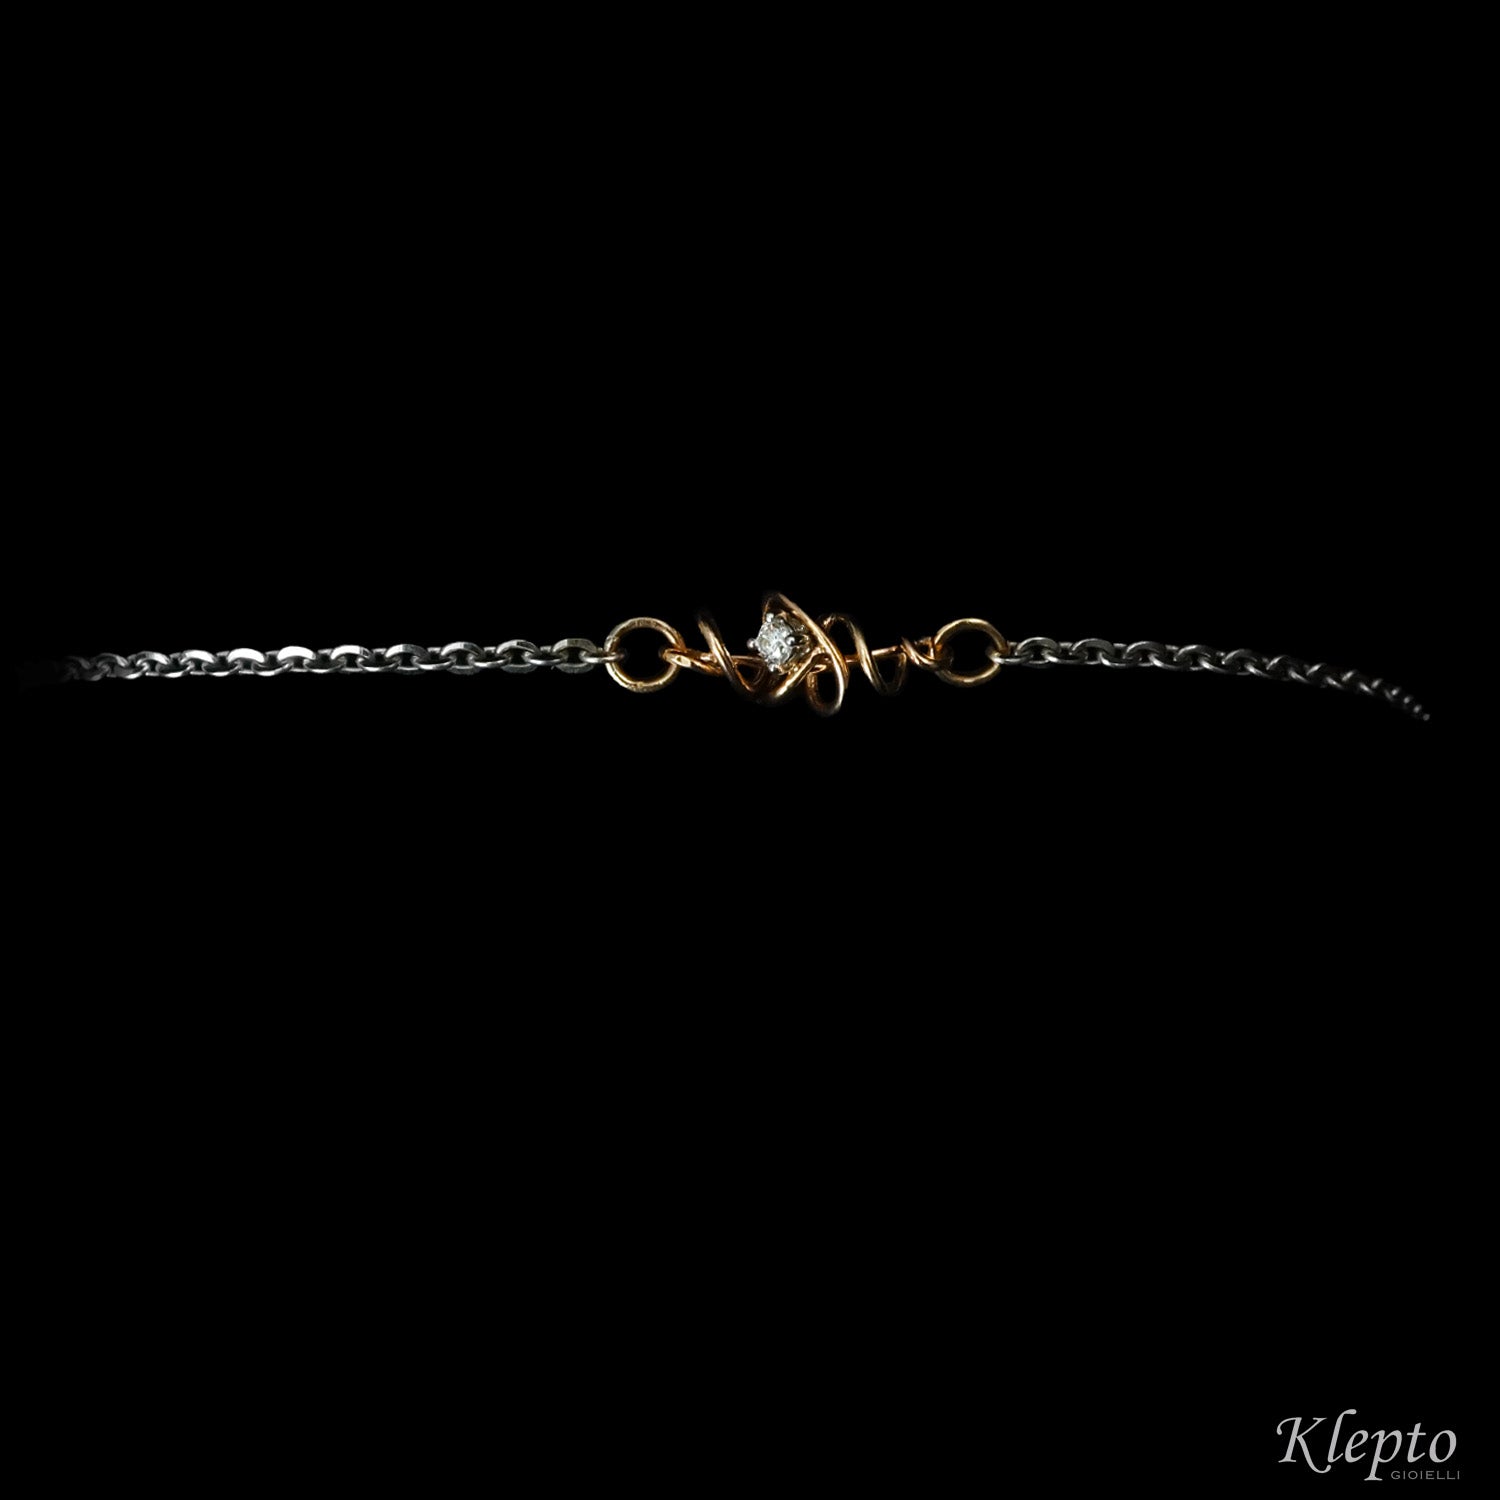 White gold bracelet with Diamond and rose gold knot